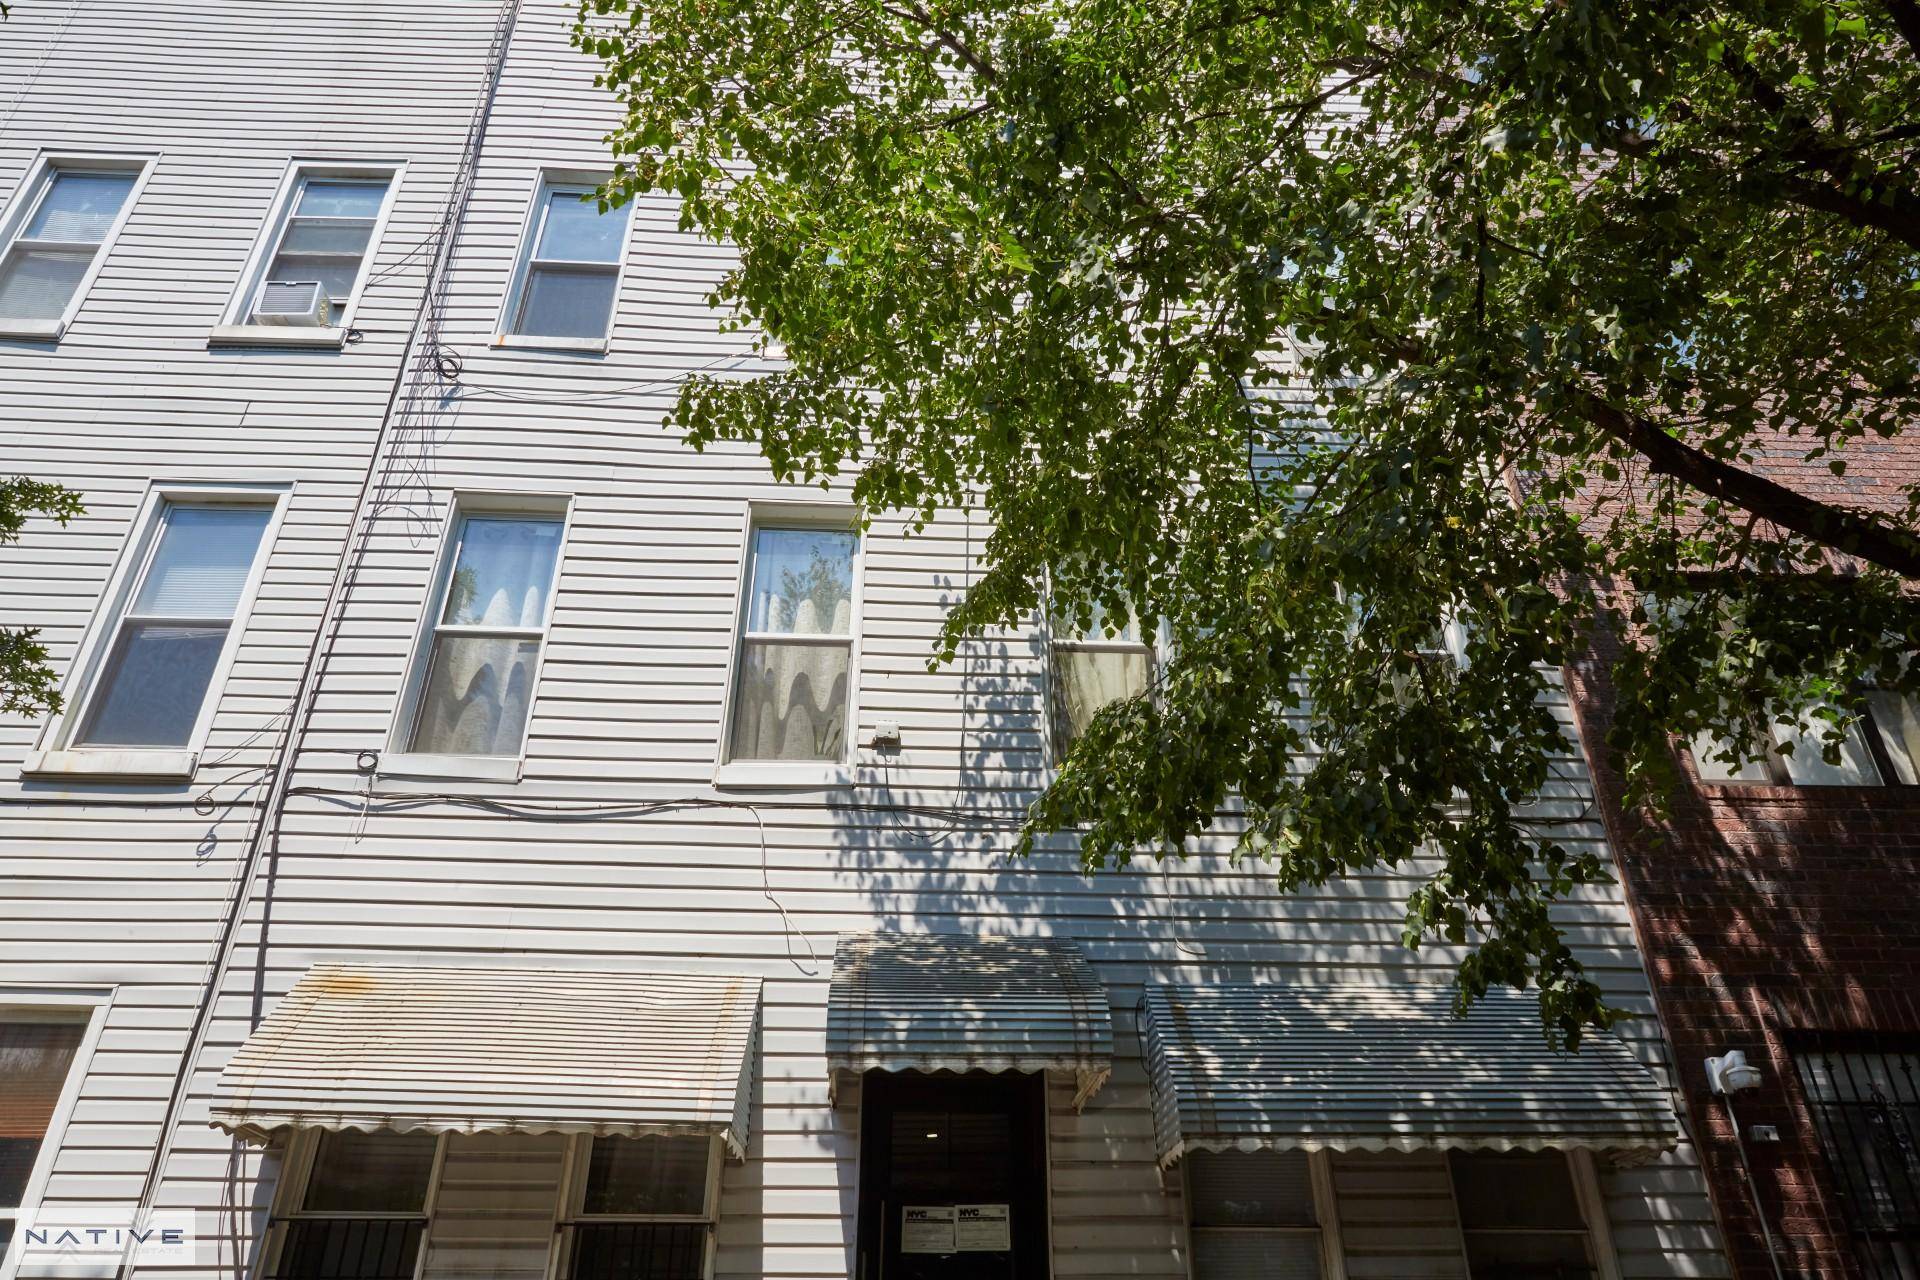 Native Real Estate is pleased to present 247 Himrod Street in Bushwick, a 6 Unit Building, FOR SALE !